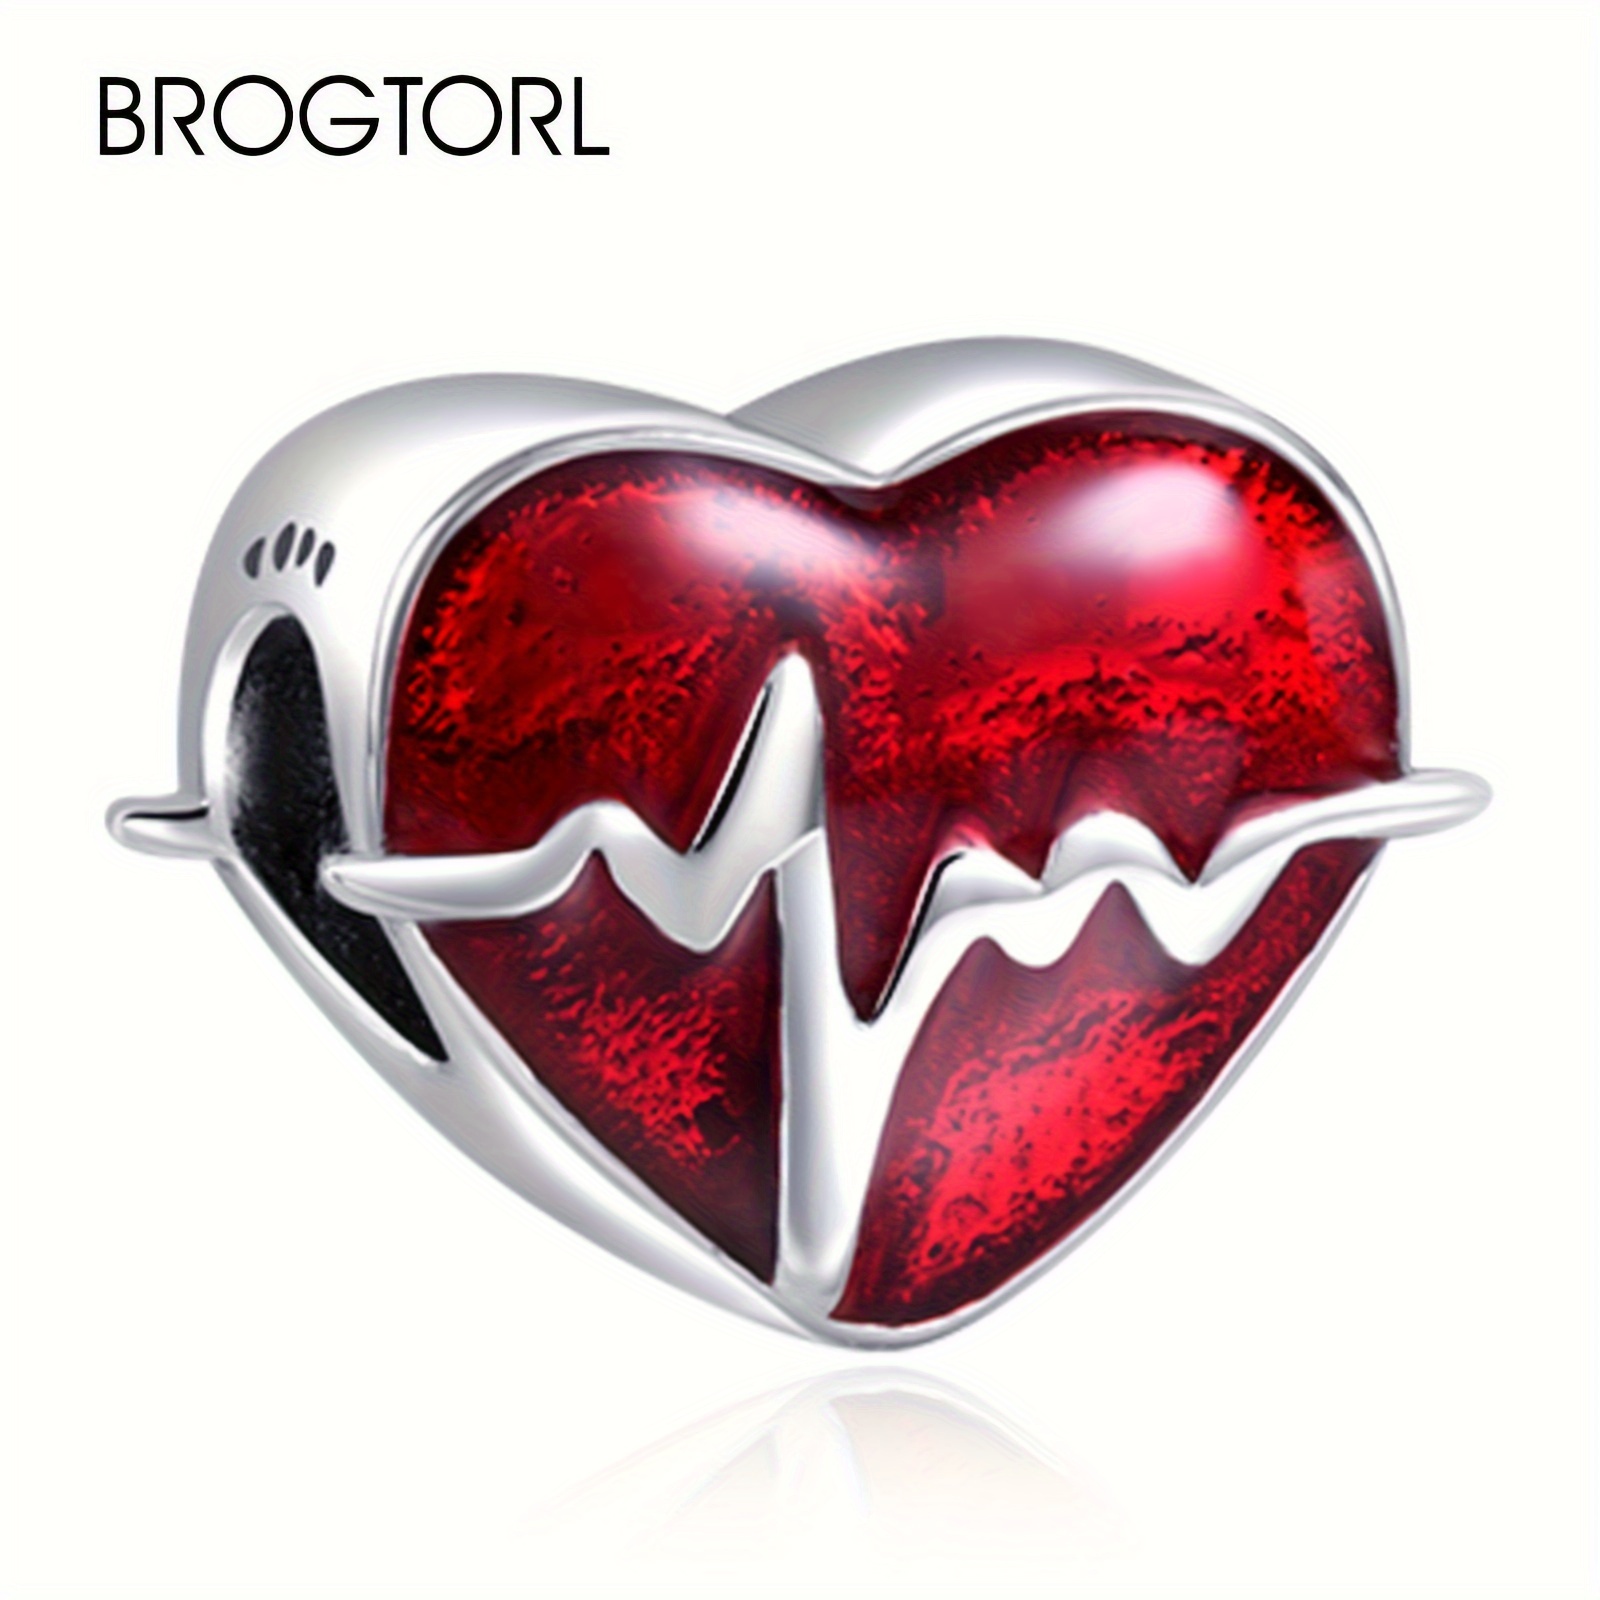 

Women's 925 Sterling Silver Diy Charm For Bracelet & Necklace Red Heartbeat Electrocardiogram Ecg Charm Cz Stone Fashion Diy Jewelry Making Pendant